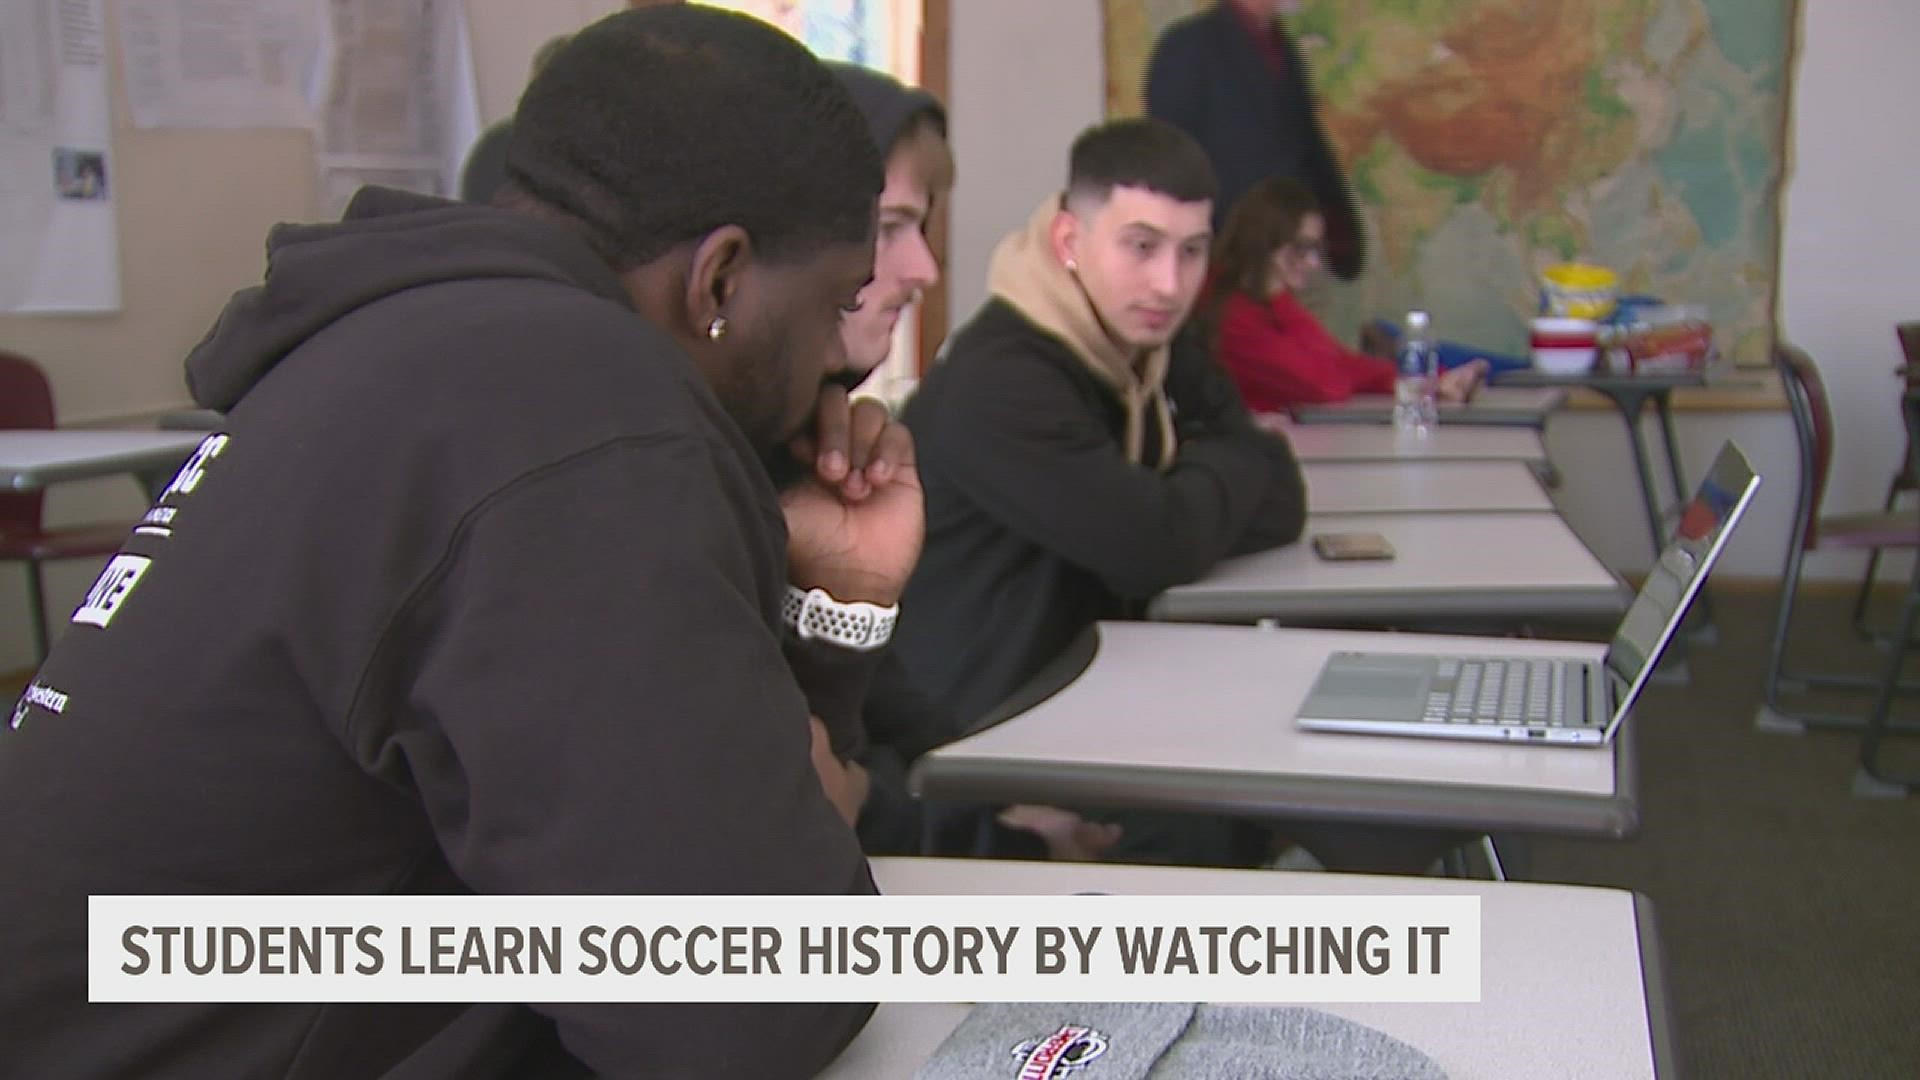 This is the first time that both the World Cup and the Anthropology of Soccer class have been held at the same time.